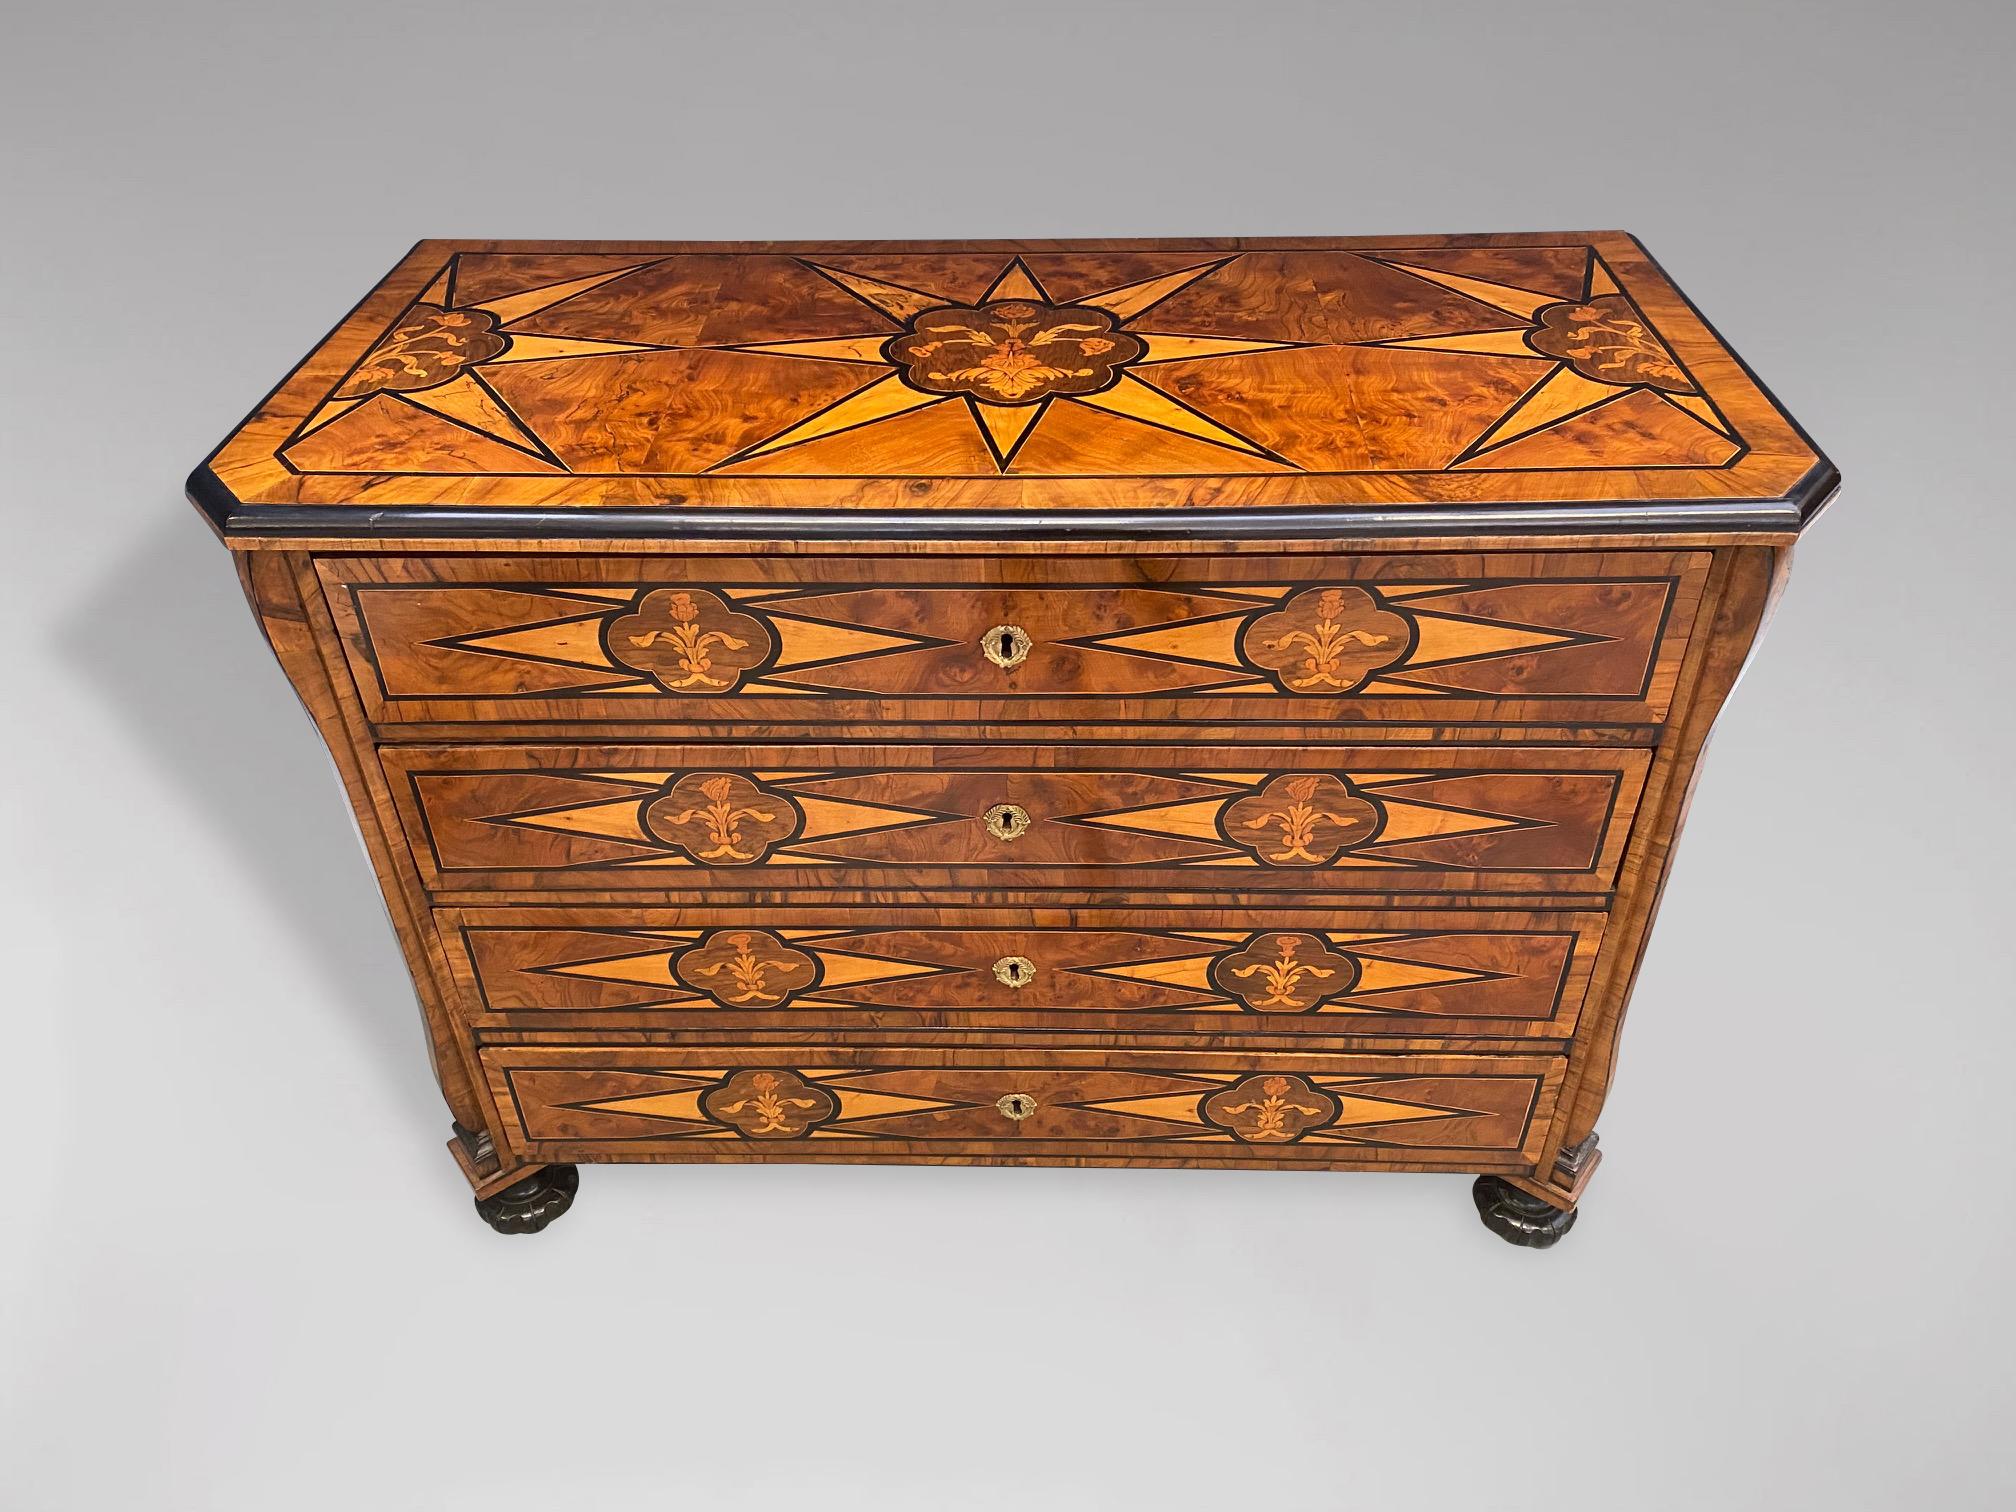 A stunning 18th century marquetry chest of drawers or commode with several different wood inlays and marquetry. Rectangular inlaid moulded top above 4 long graduated drawers. All standing on reeded bun feet. All drawers beautifully lined with